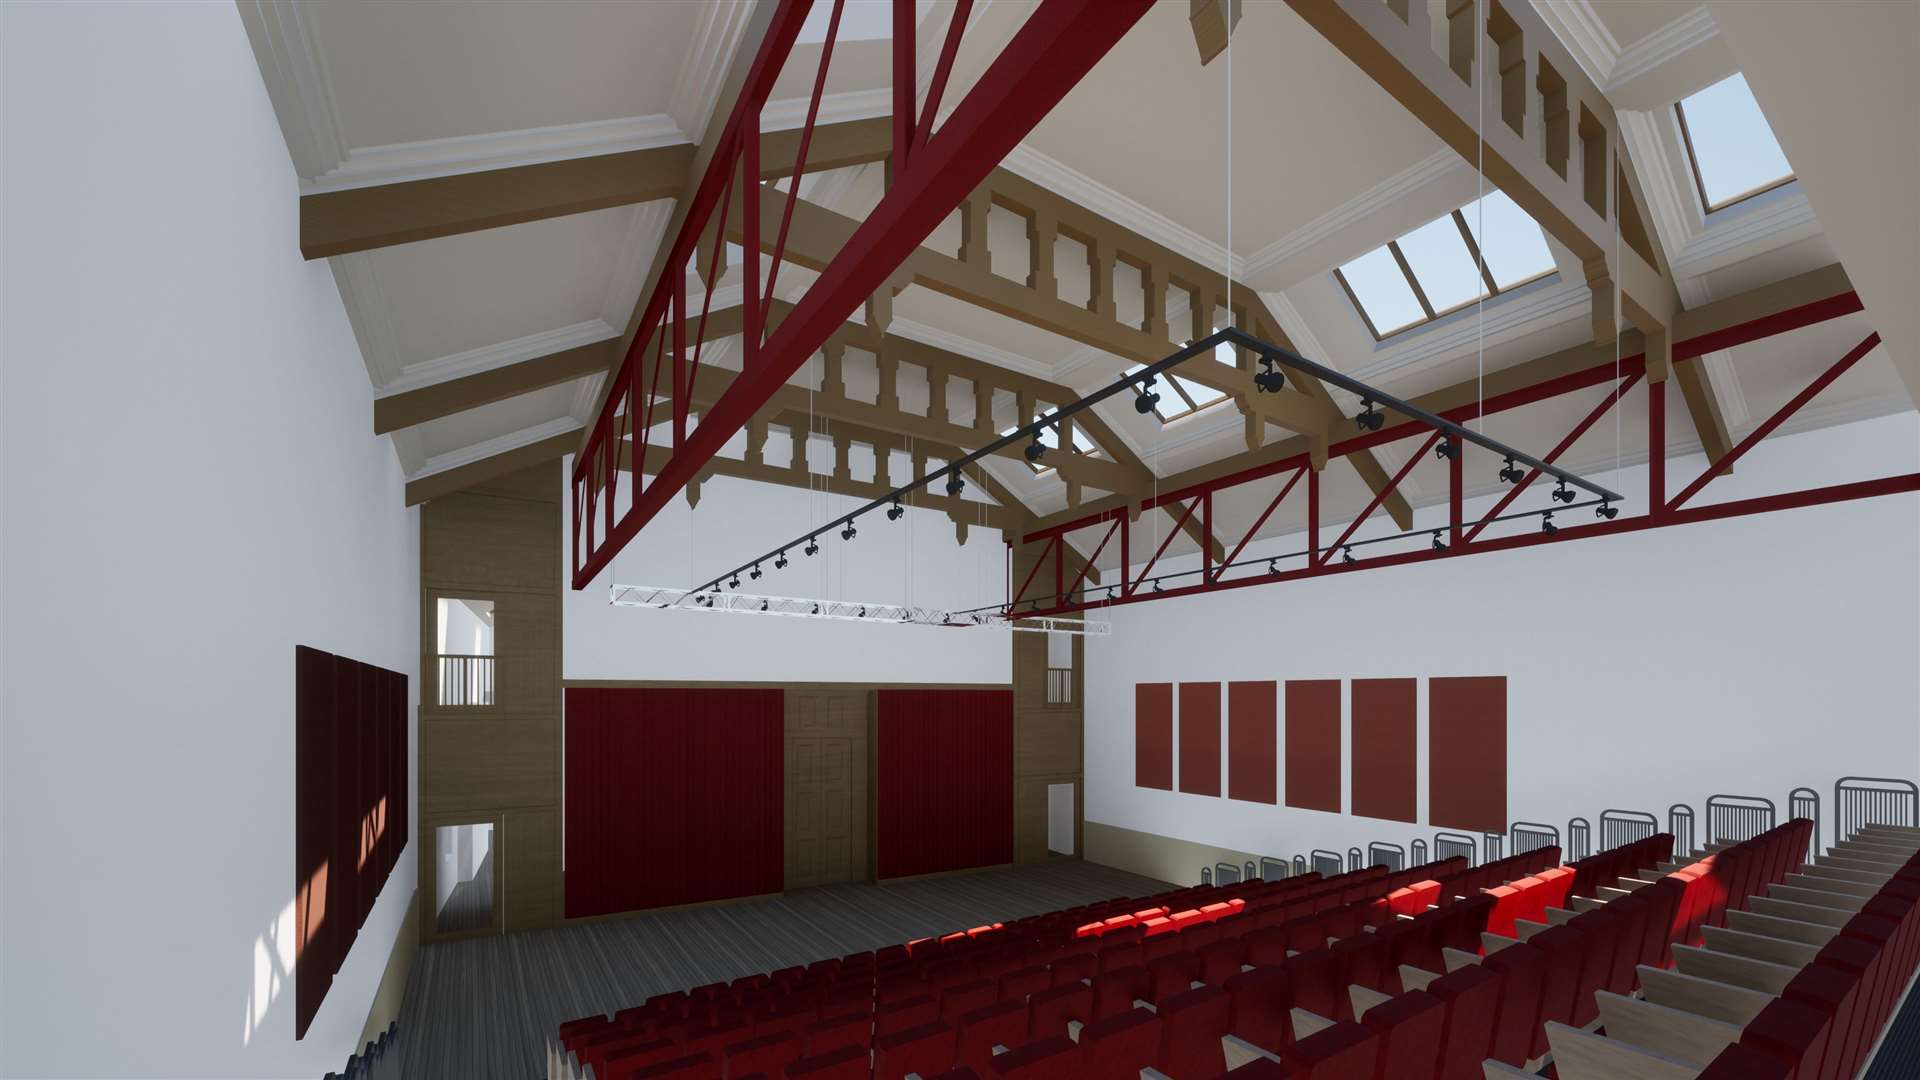 Another view from the proposed retractable seating in the main hall.